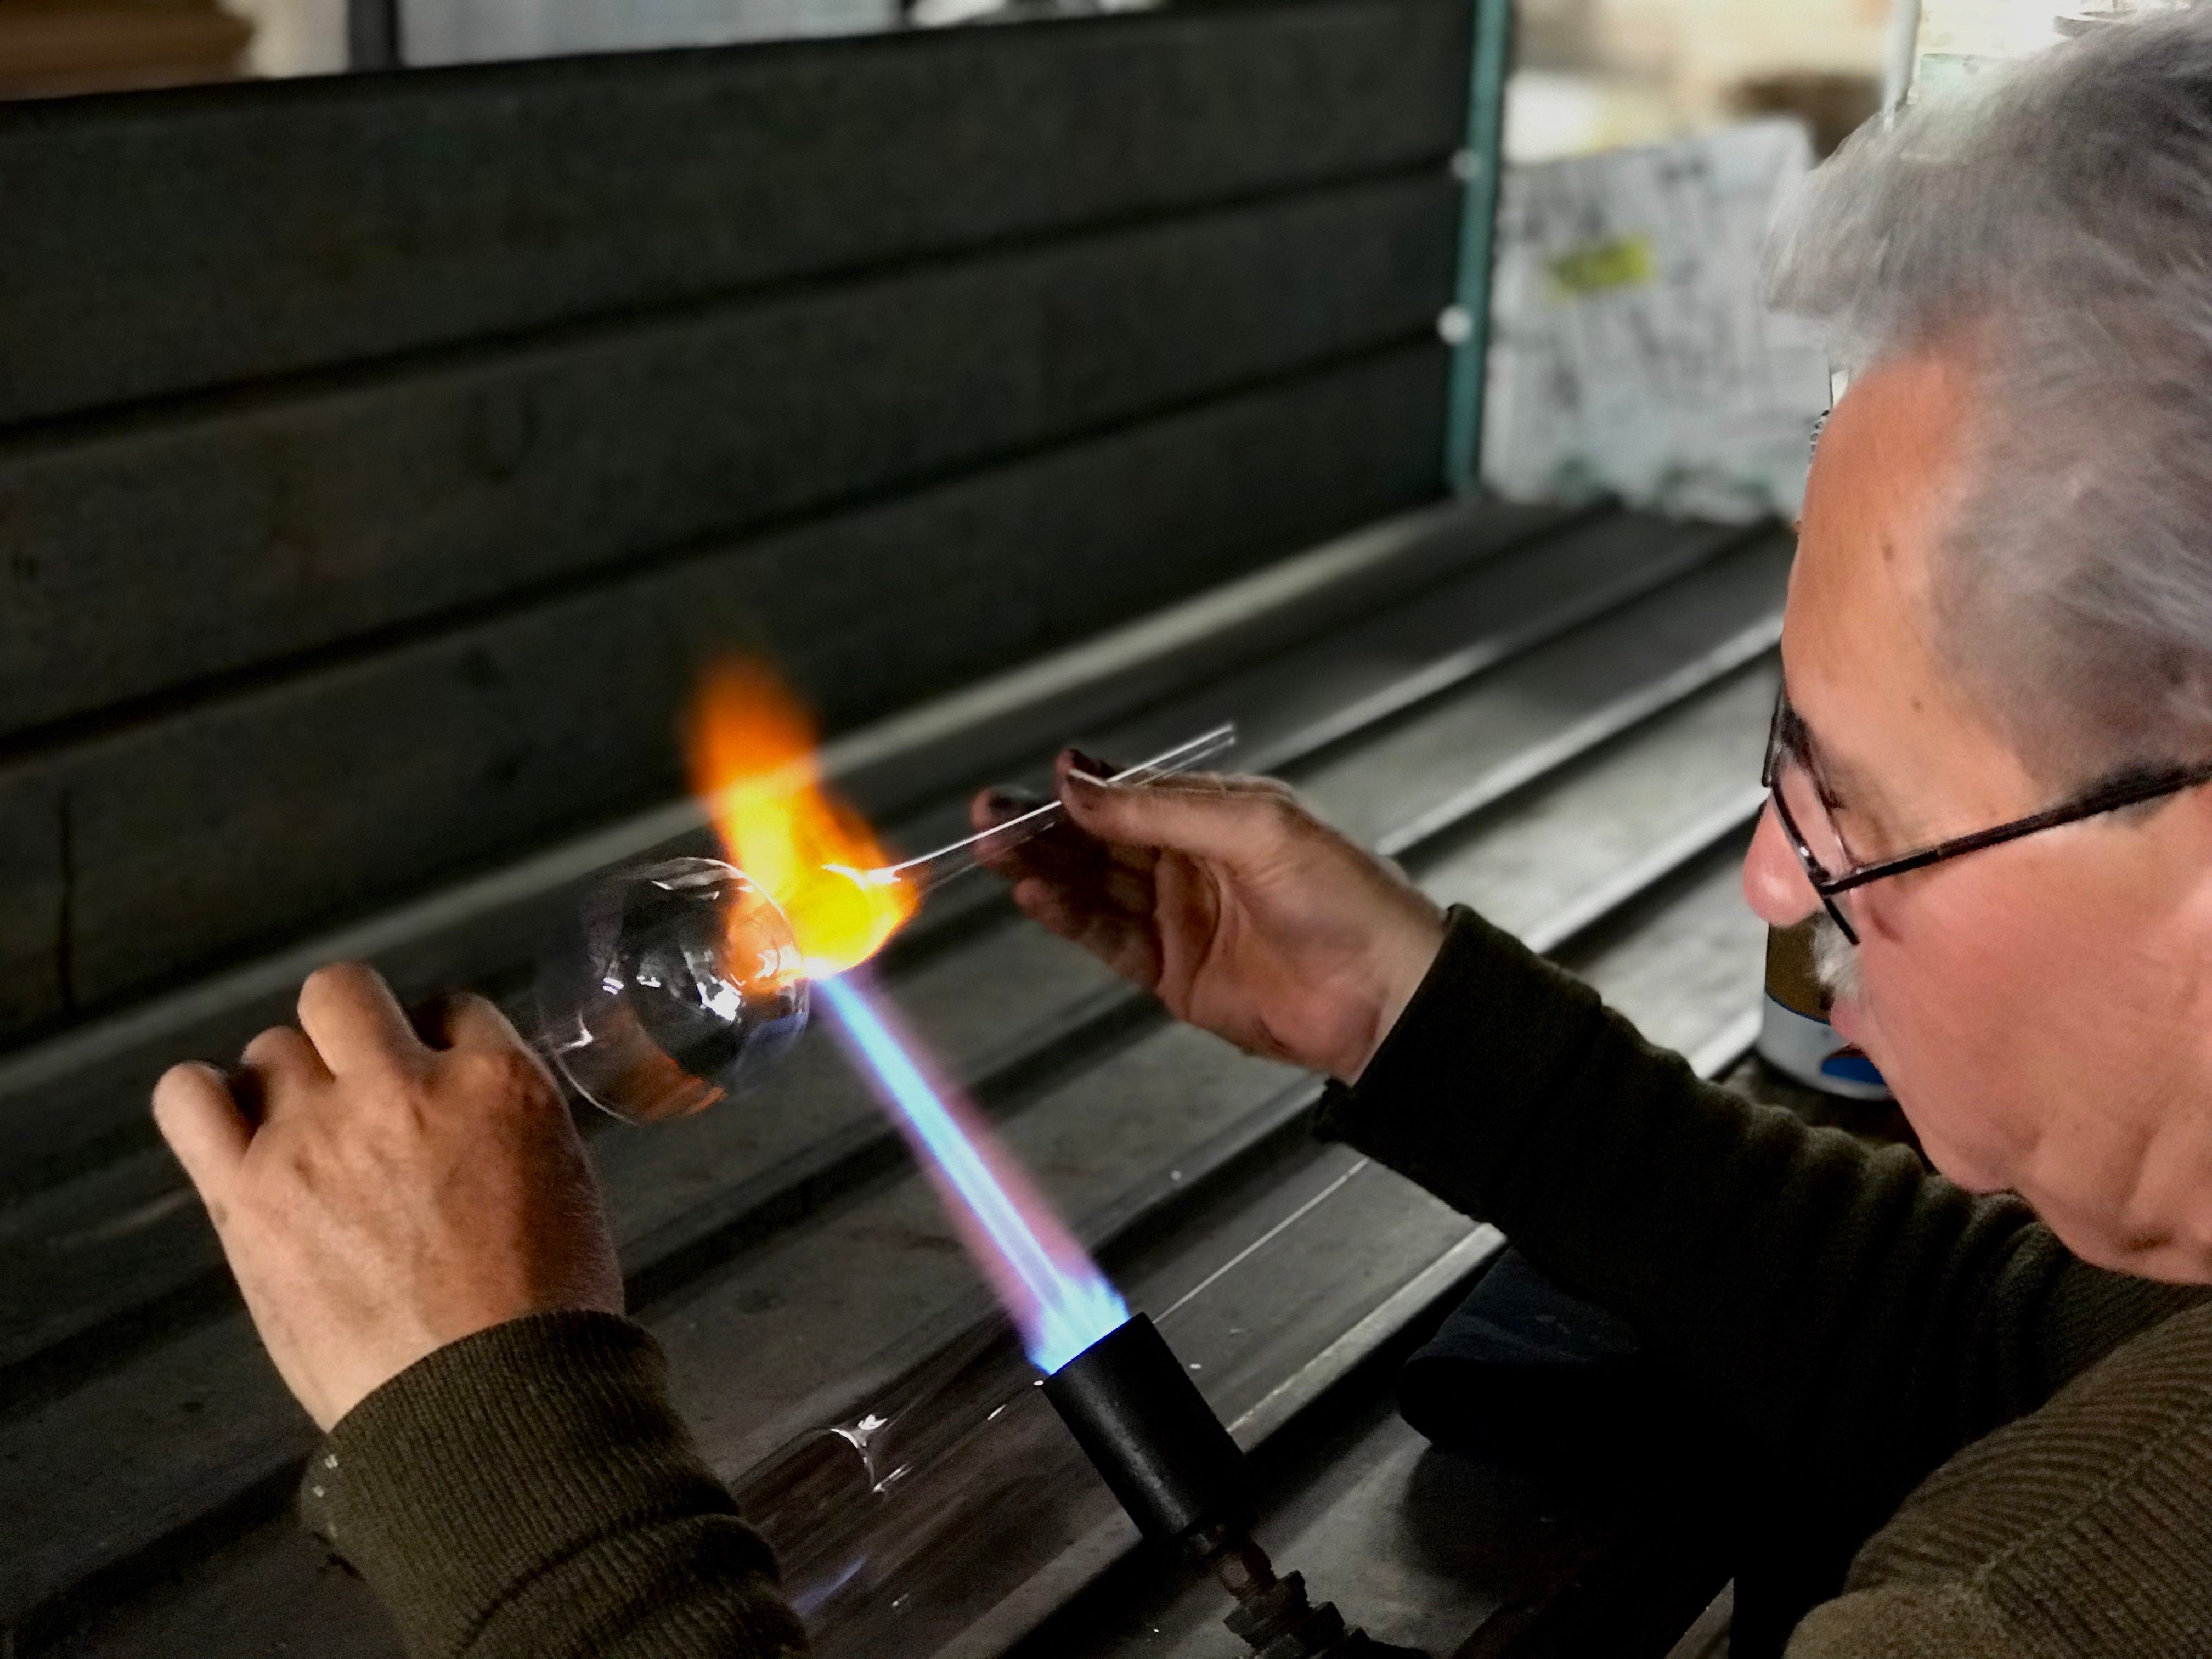 How 'Blown Away' Has Given Glassmakers a Boost